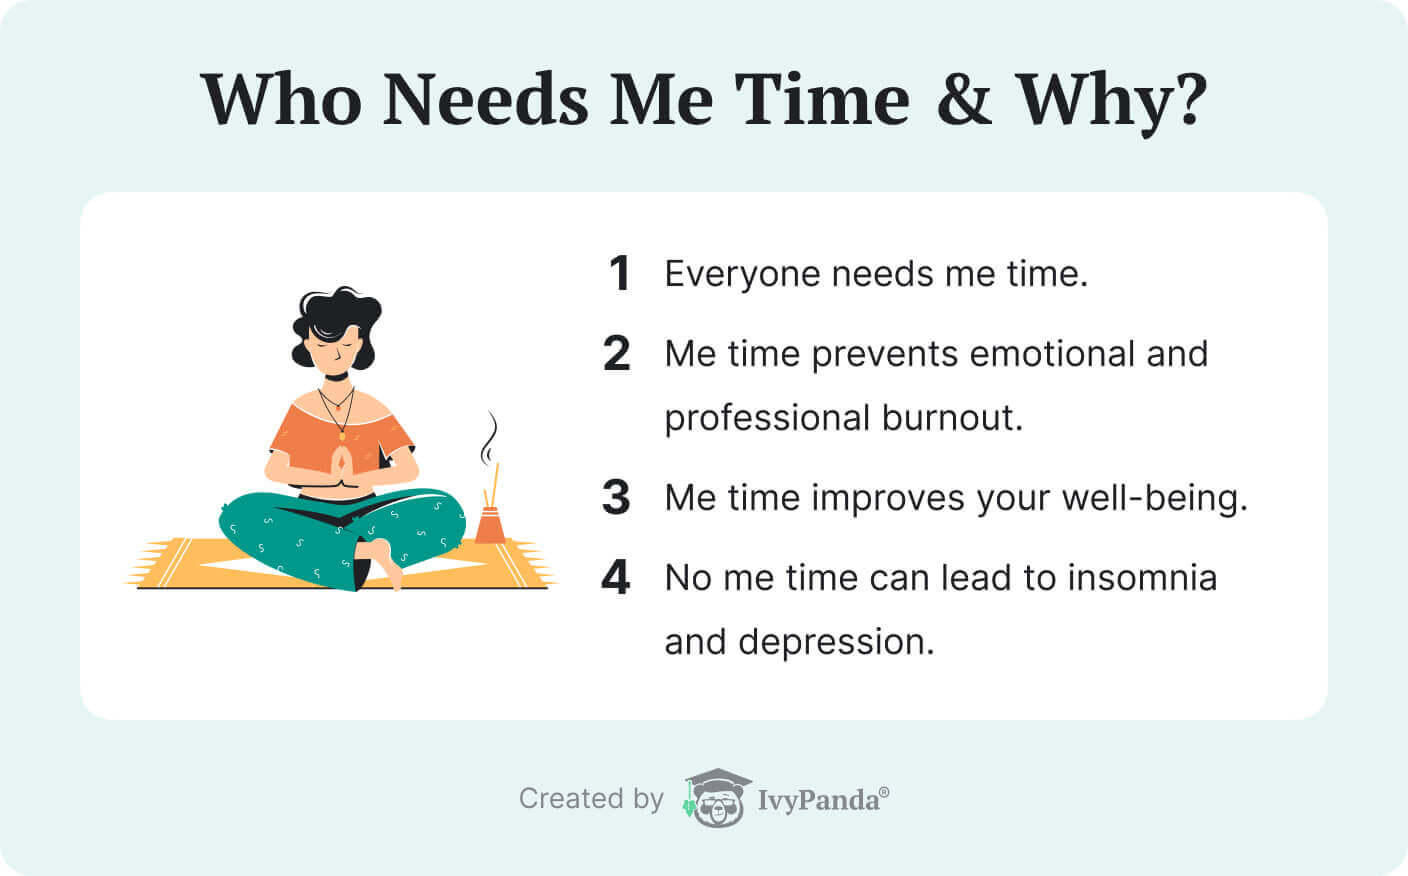 The picture explains why everyone needs me time (to prevent stress and burnout).